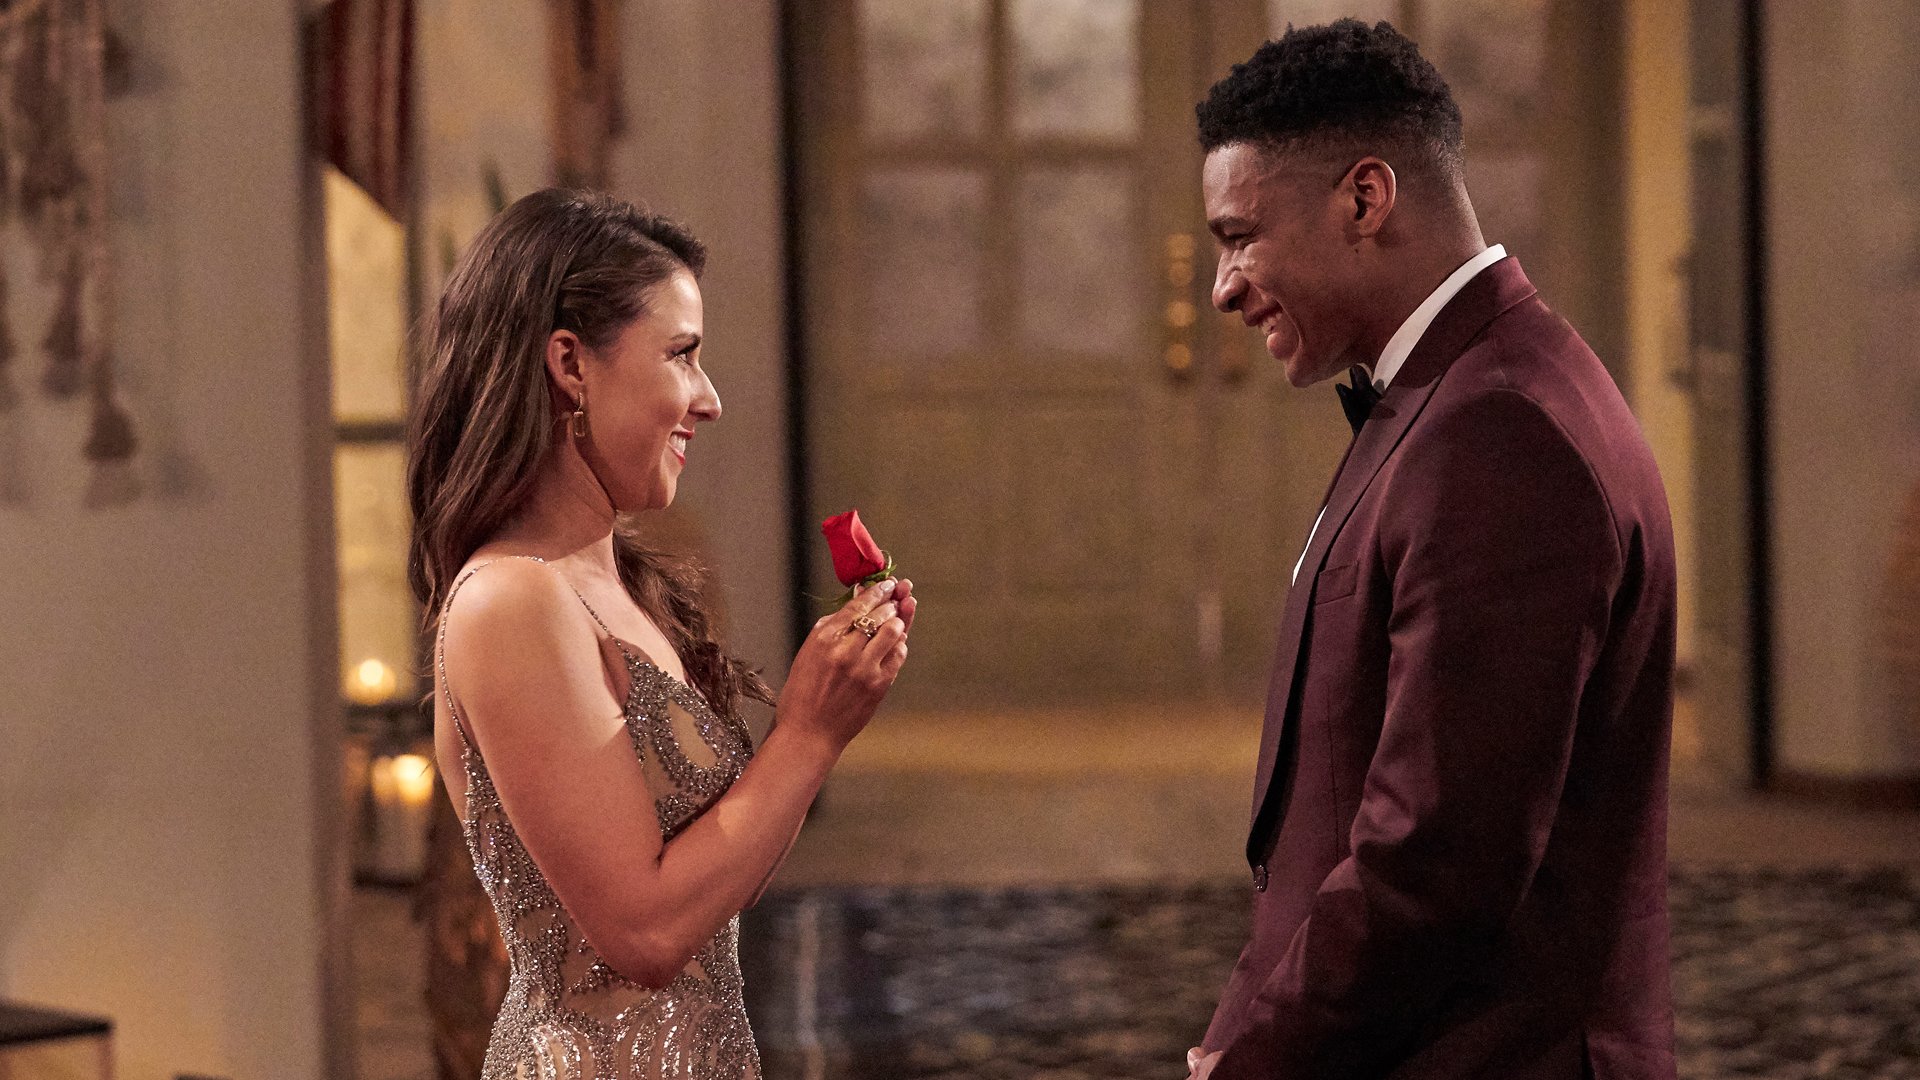 Katie Thurston gives Andrew Spencer a rose in ‘The Bachelorette’ Season 17 Episode 4